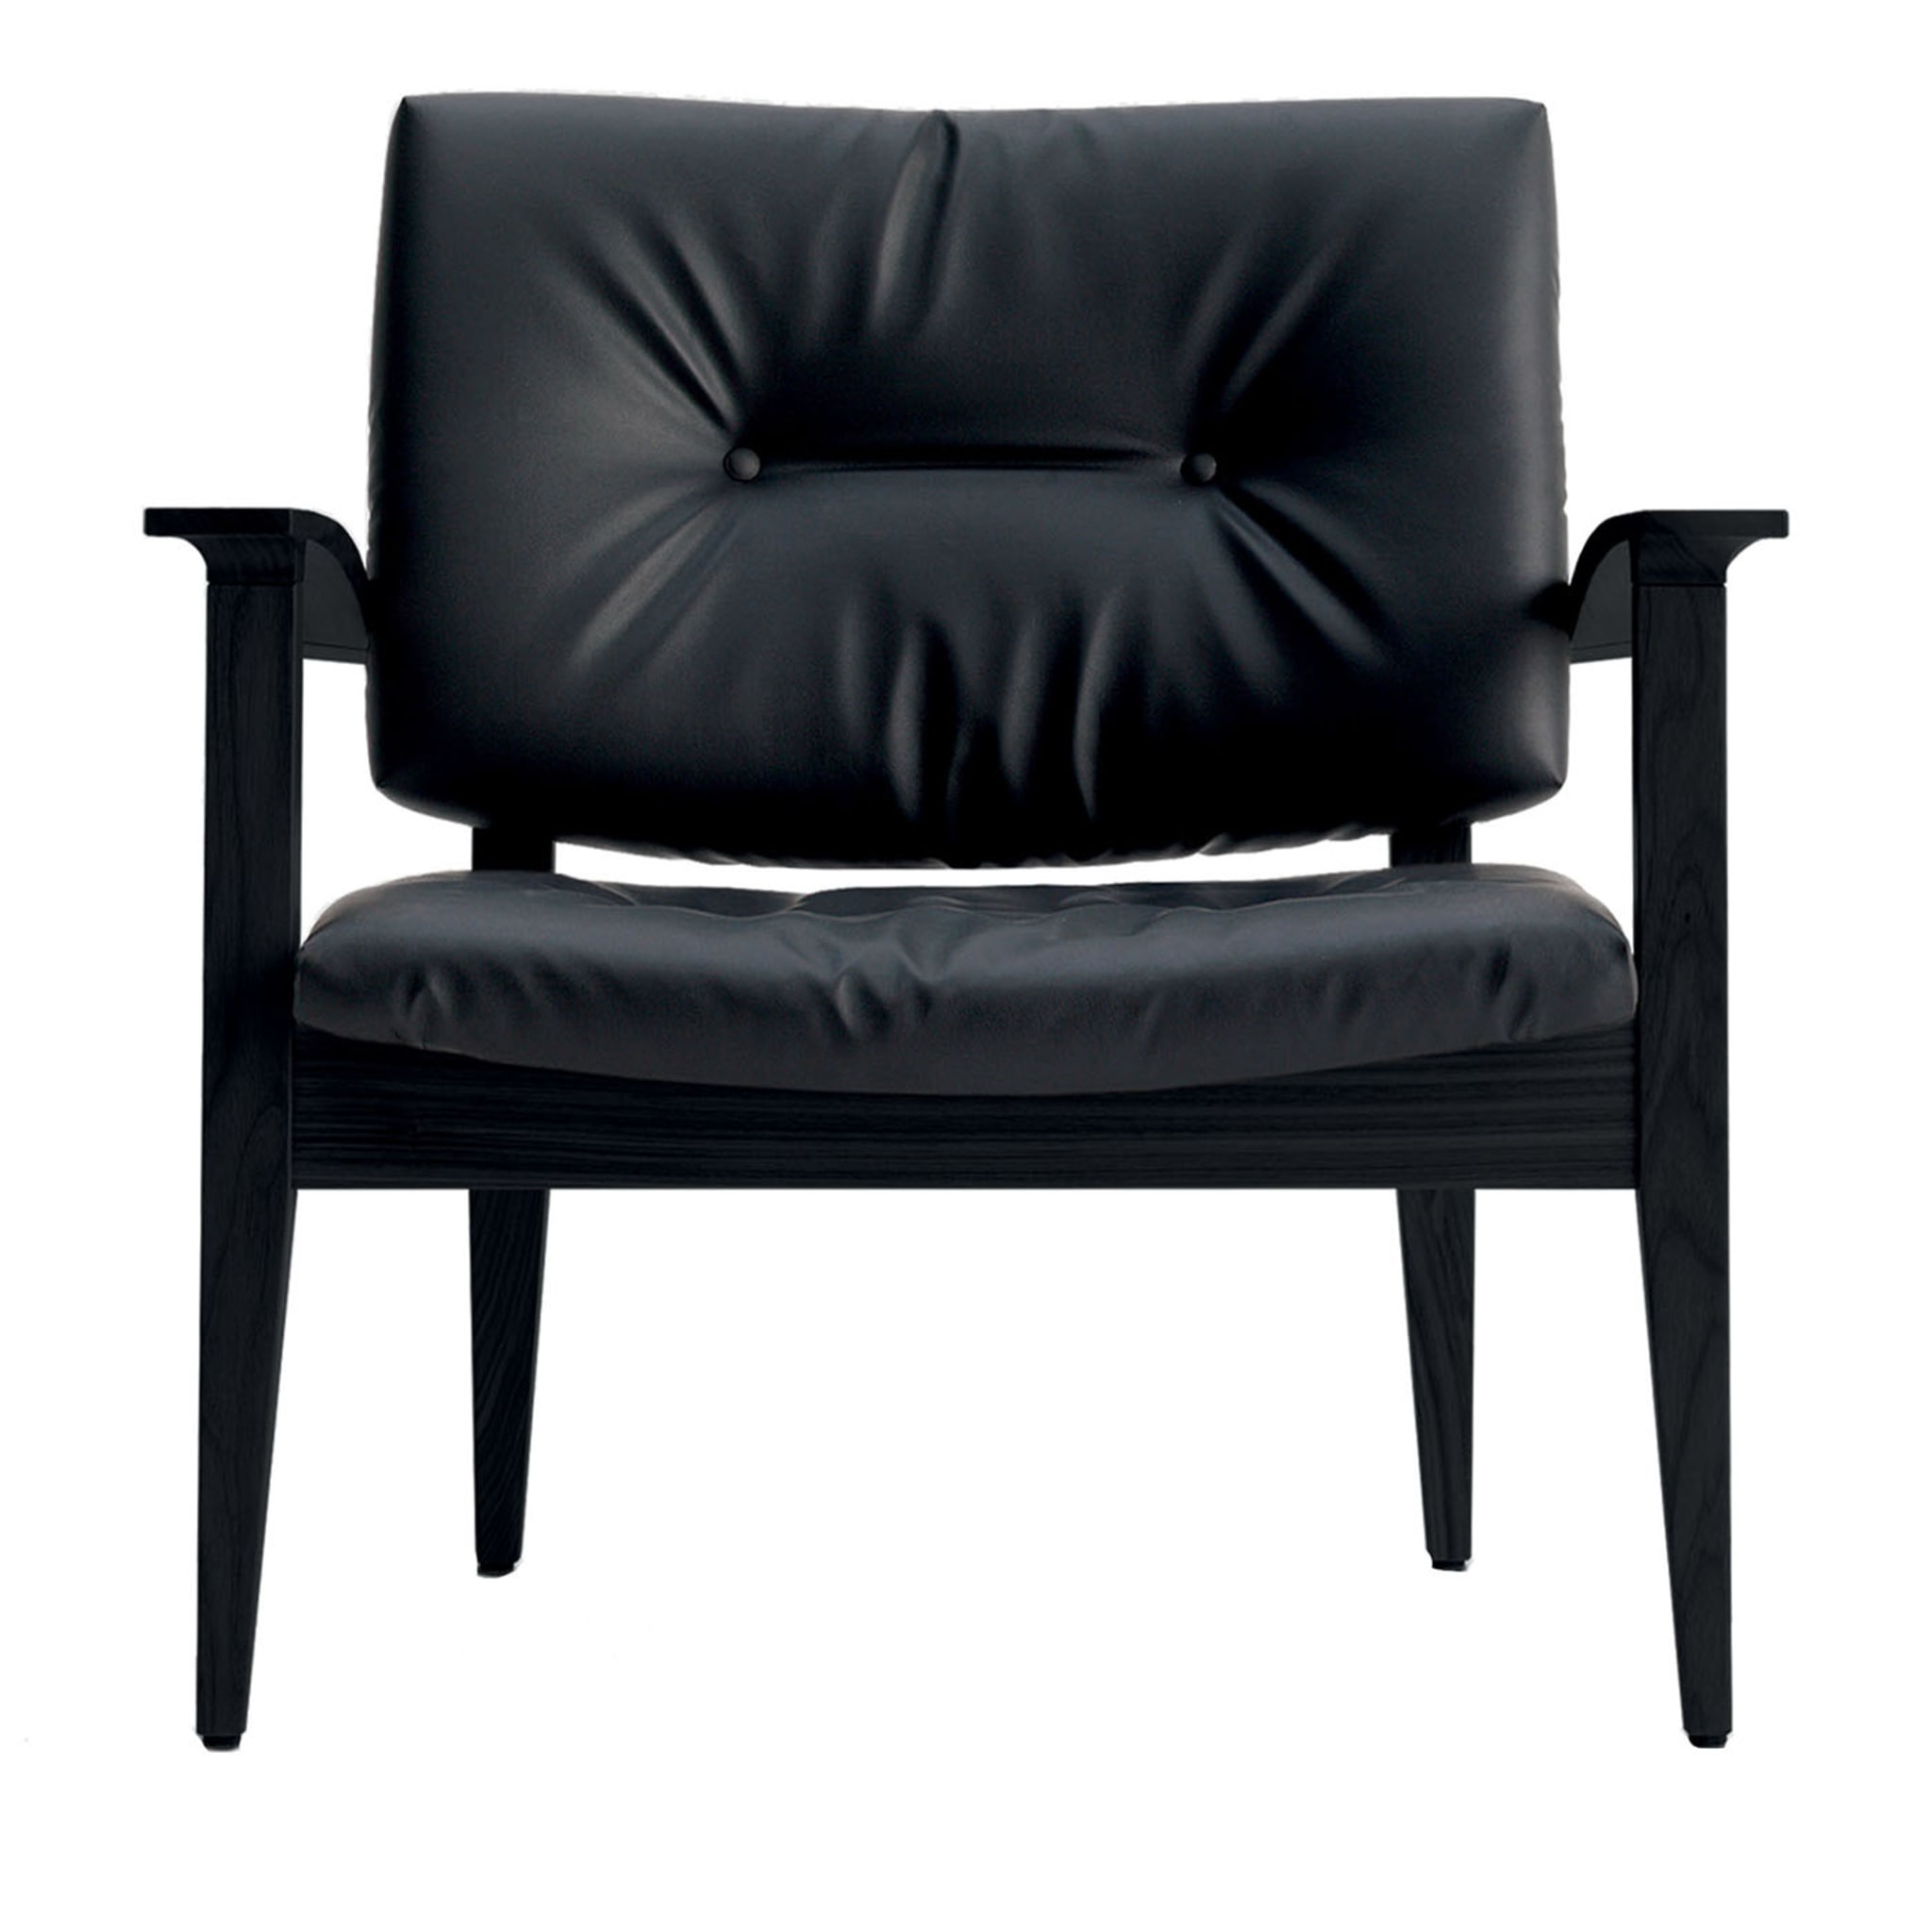 Eileen Black Armchair by Werther Toffoloni - Main view